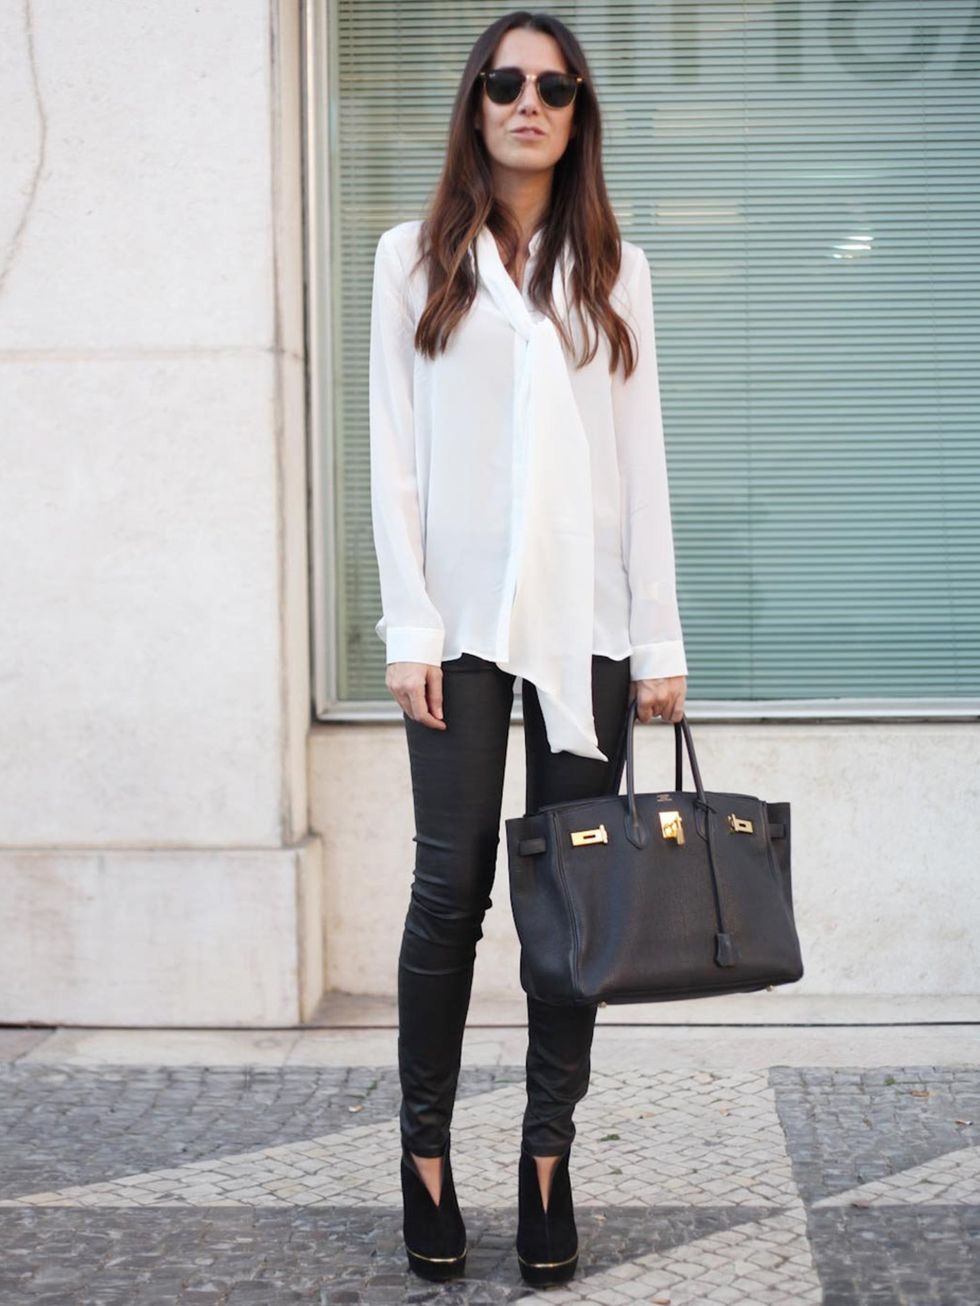 <p>Sara, Works in fashion.Hermes shirt and bag, vintage shoes.</p>